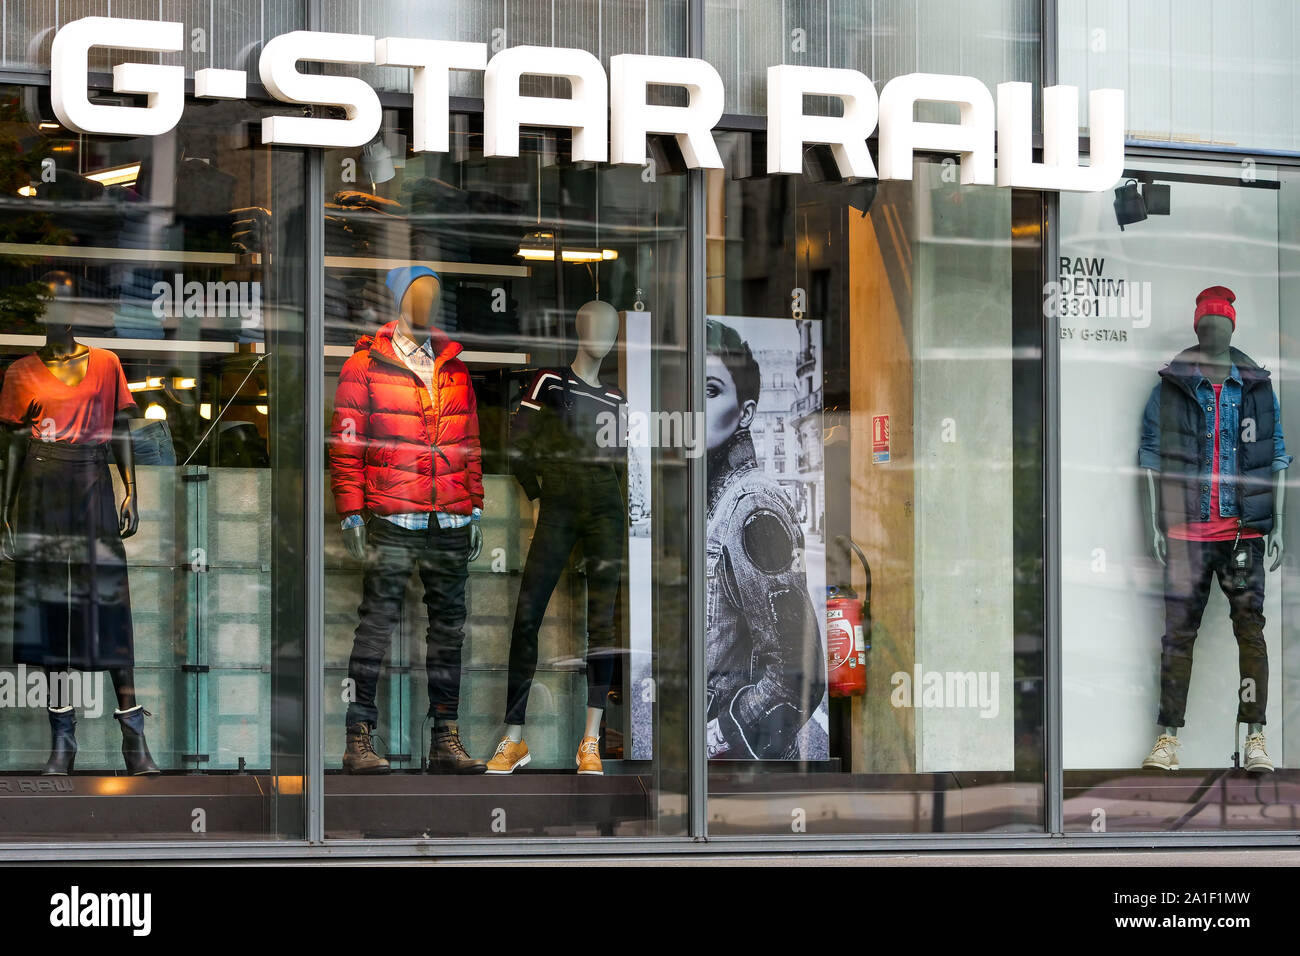 G-Star Raw fashion shop, Confluence commercial center, Confluence district,  Lyon, France Stock Photo - Alamy